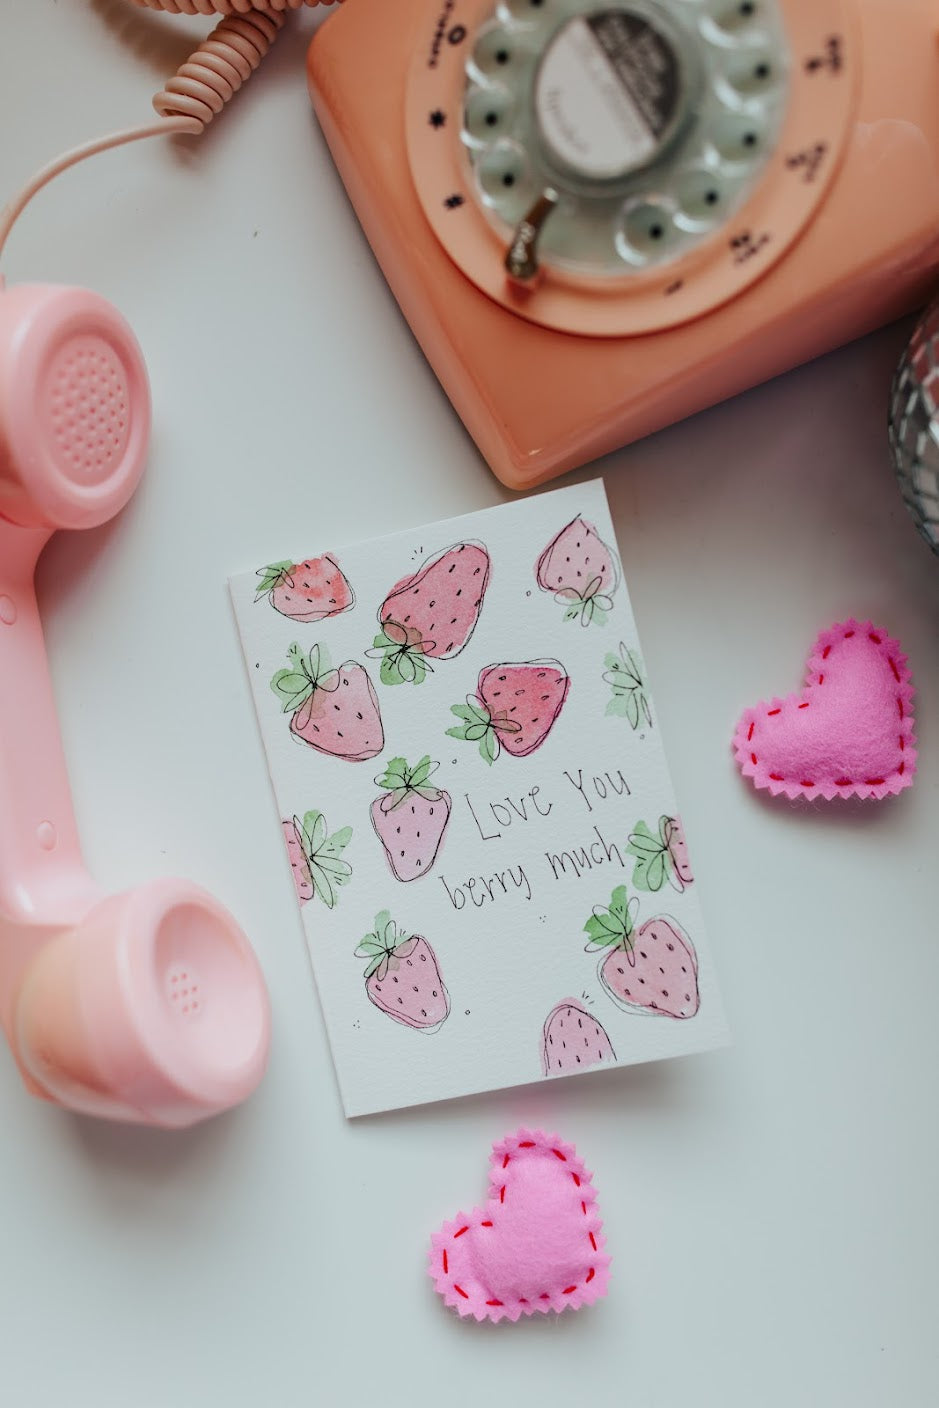 Hand Painted Love you BERRY Much Card